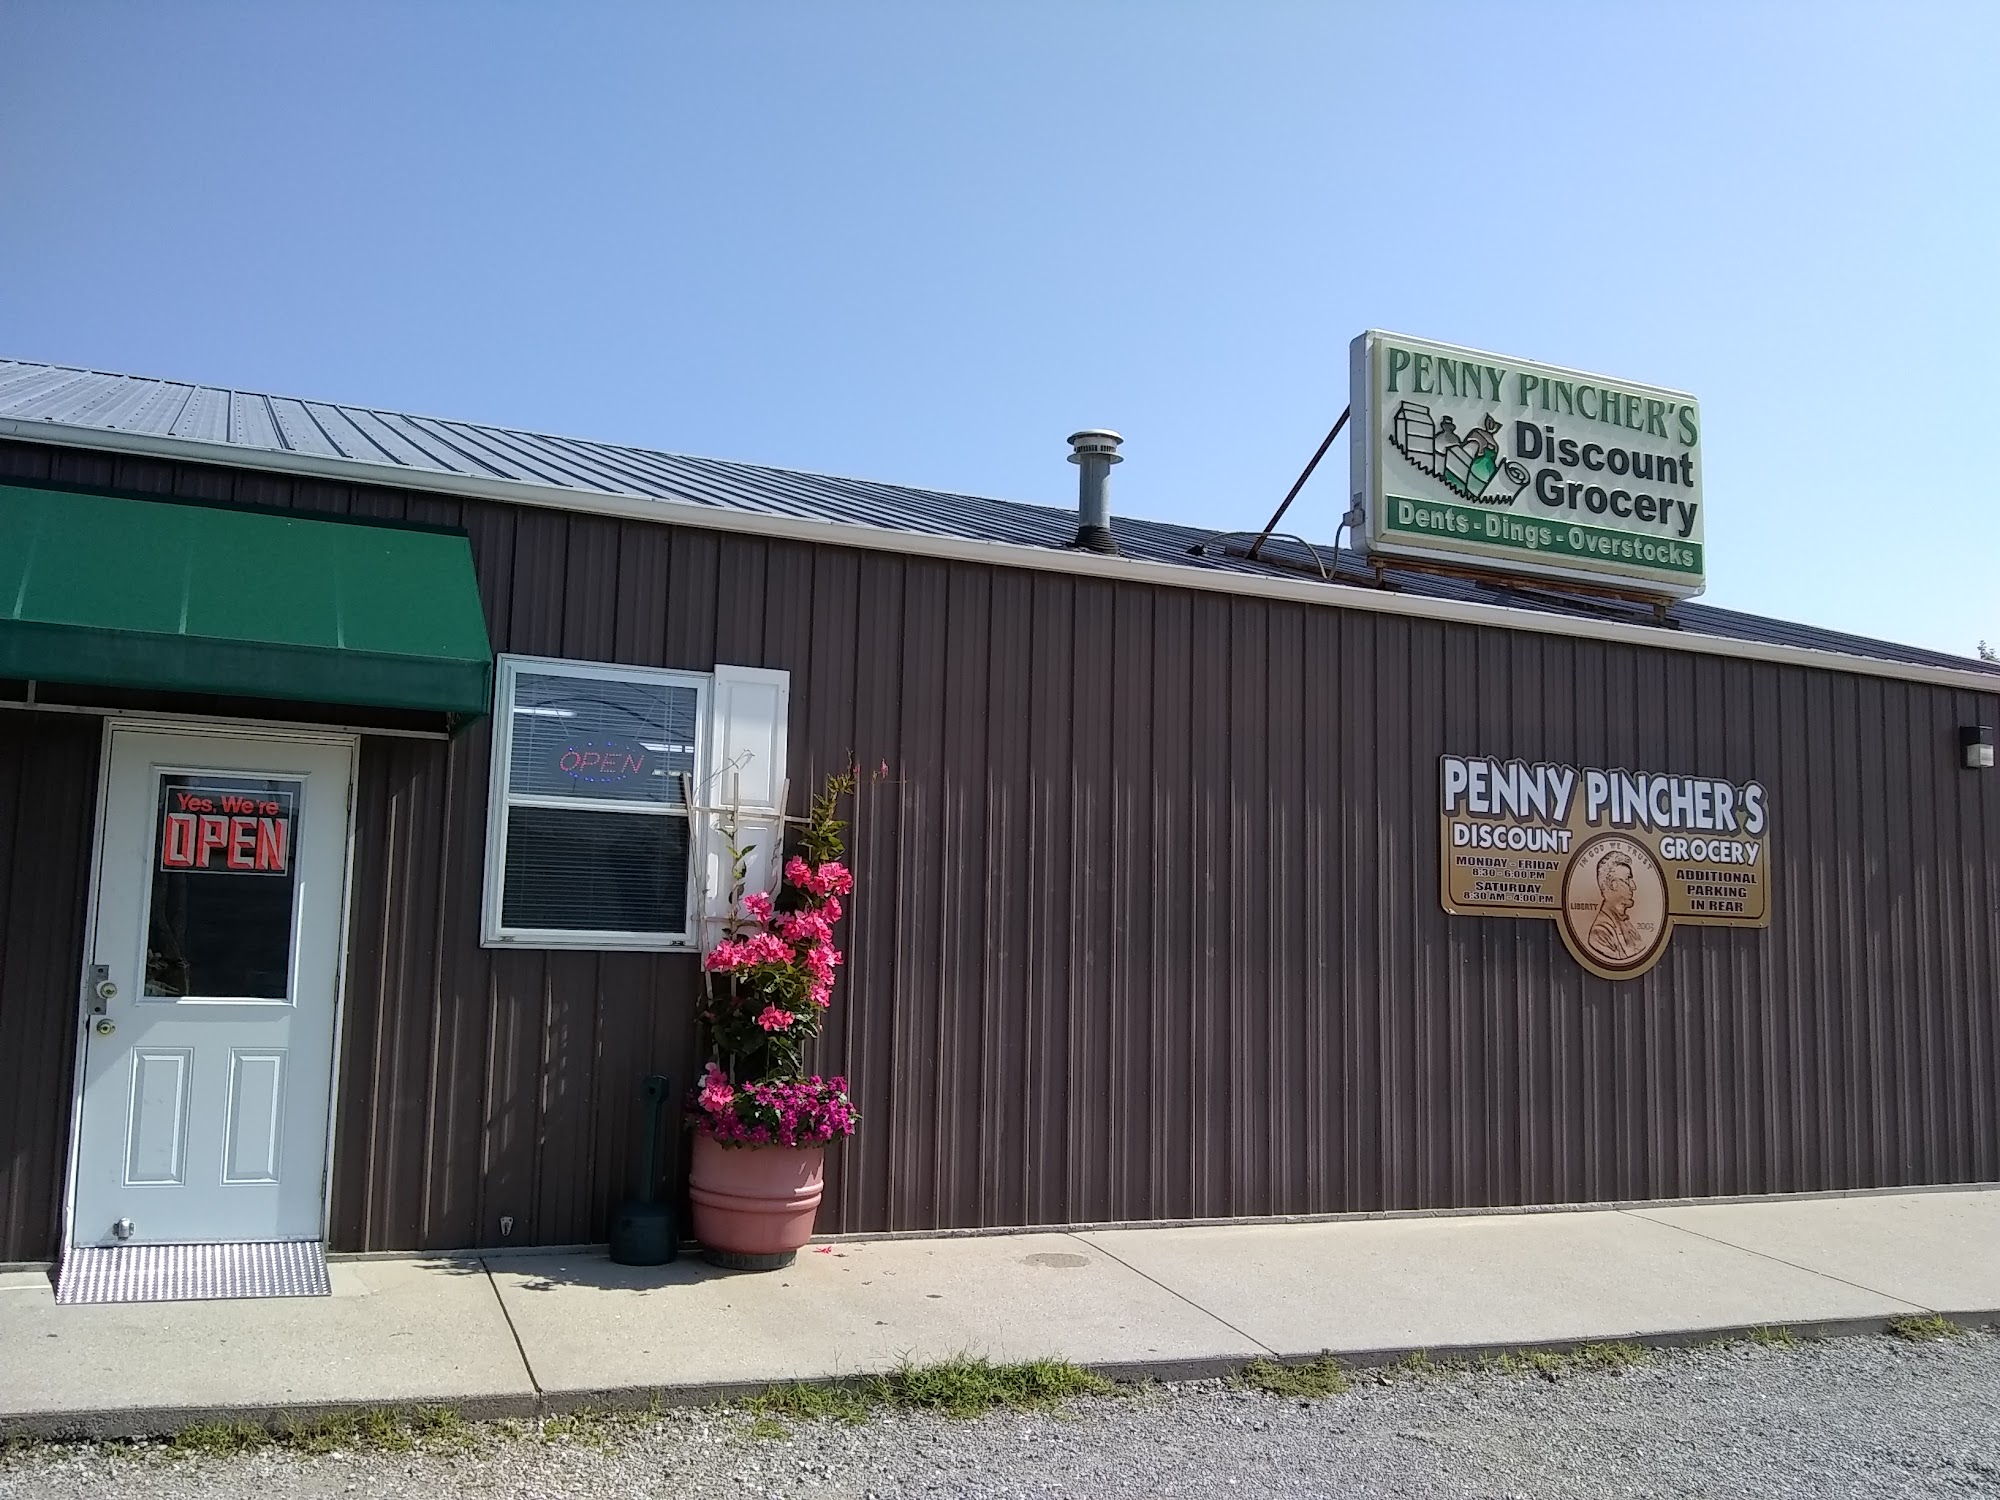 Penny Pincher's Discount Grocery